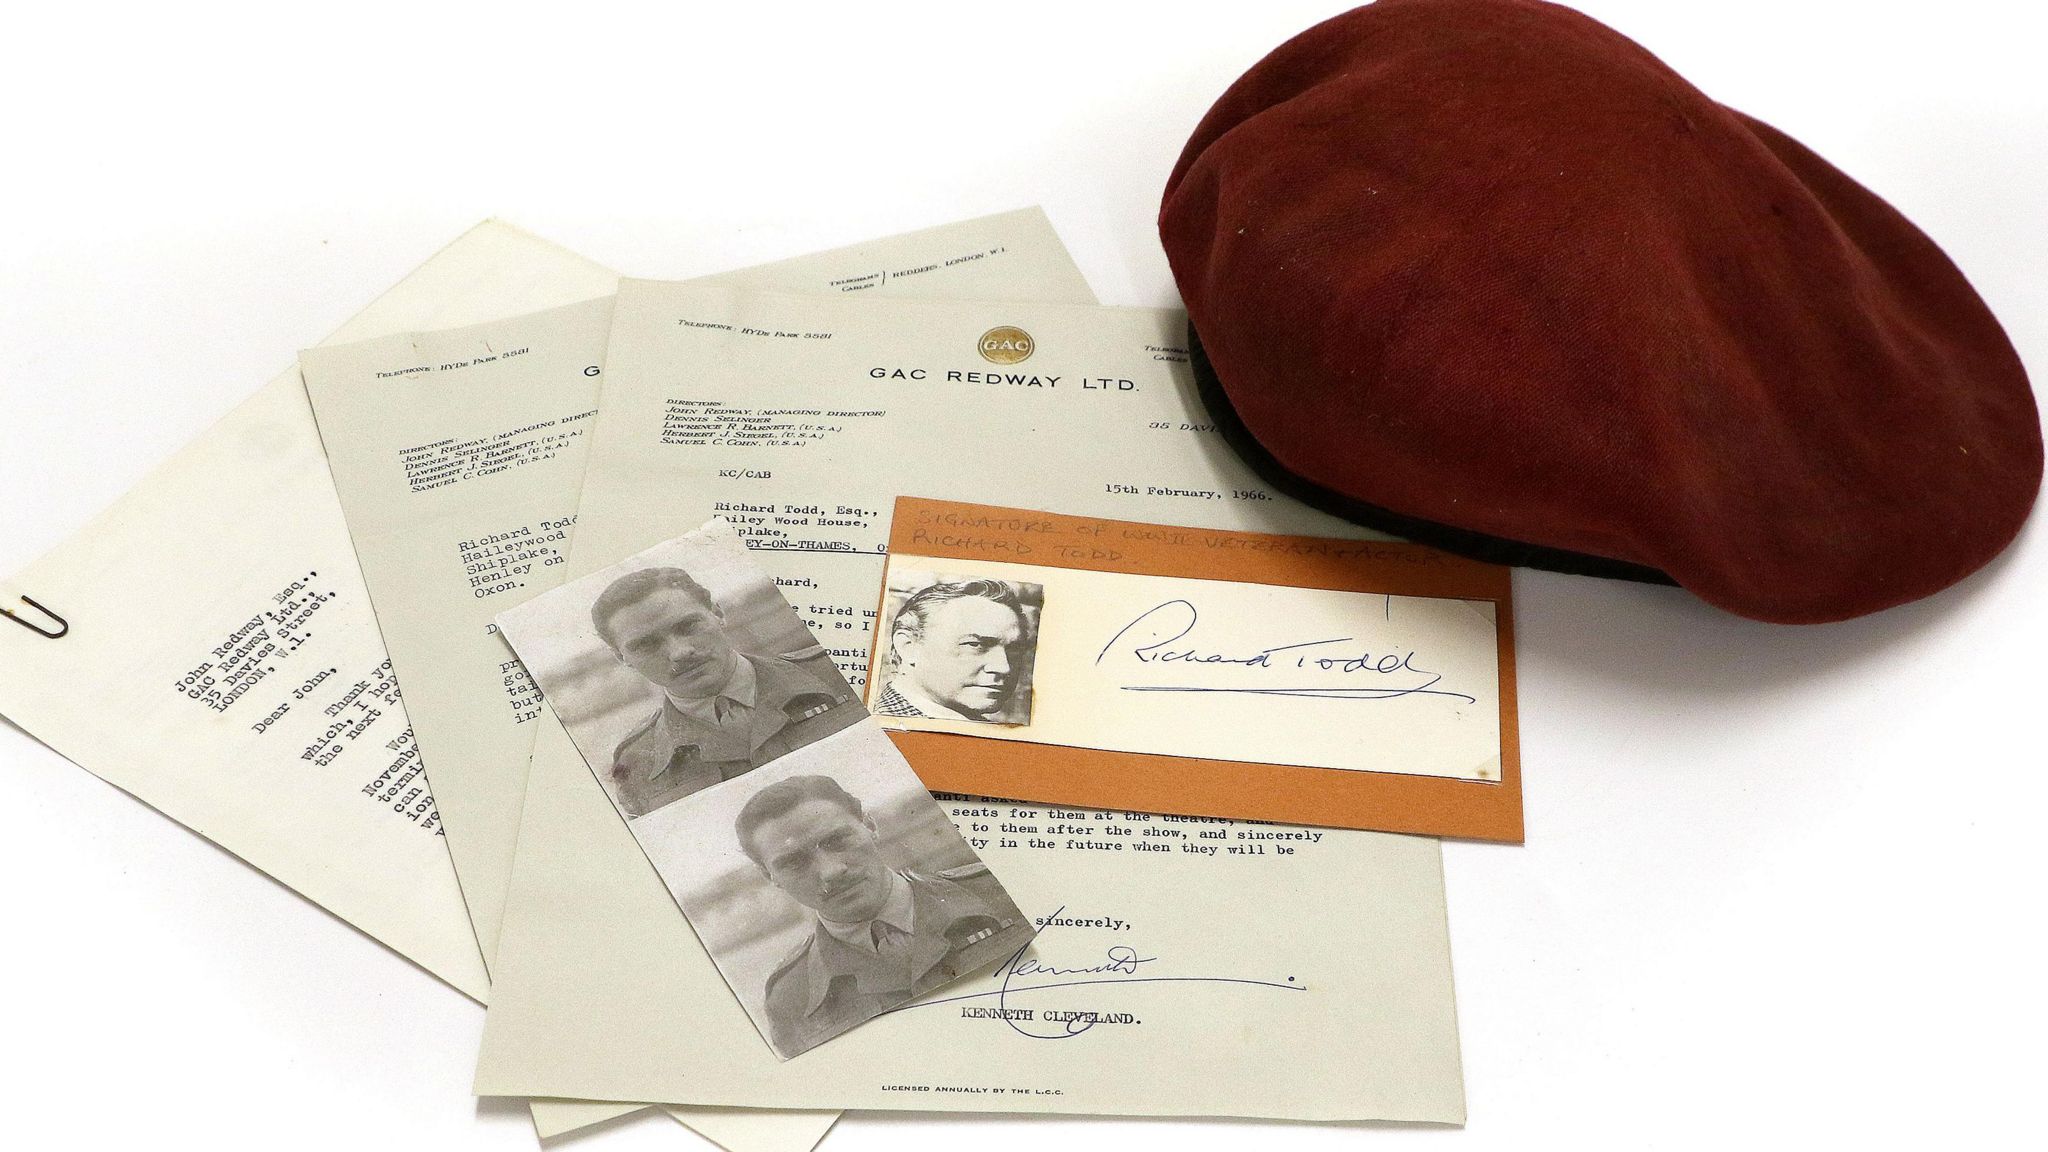 A beret and a portrait photo signed by Rihcard Todd with correspondence addressed to him